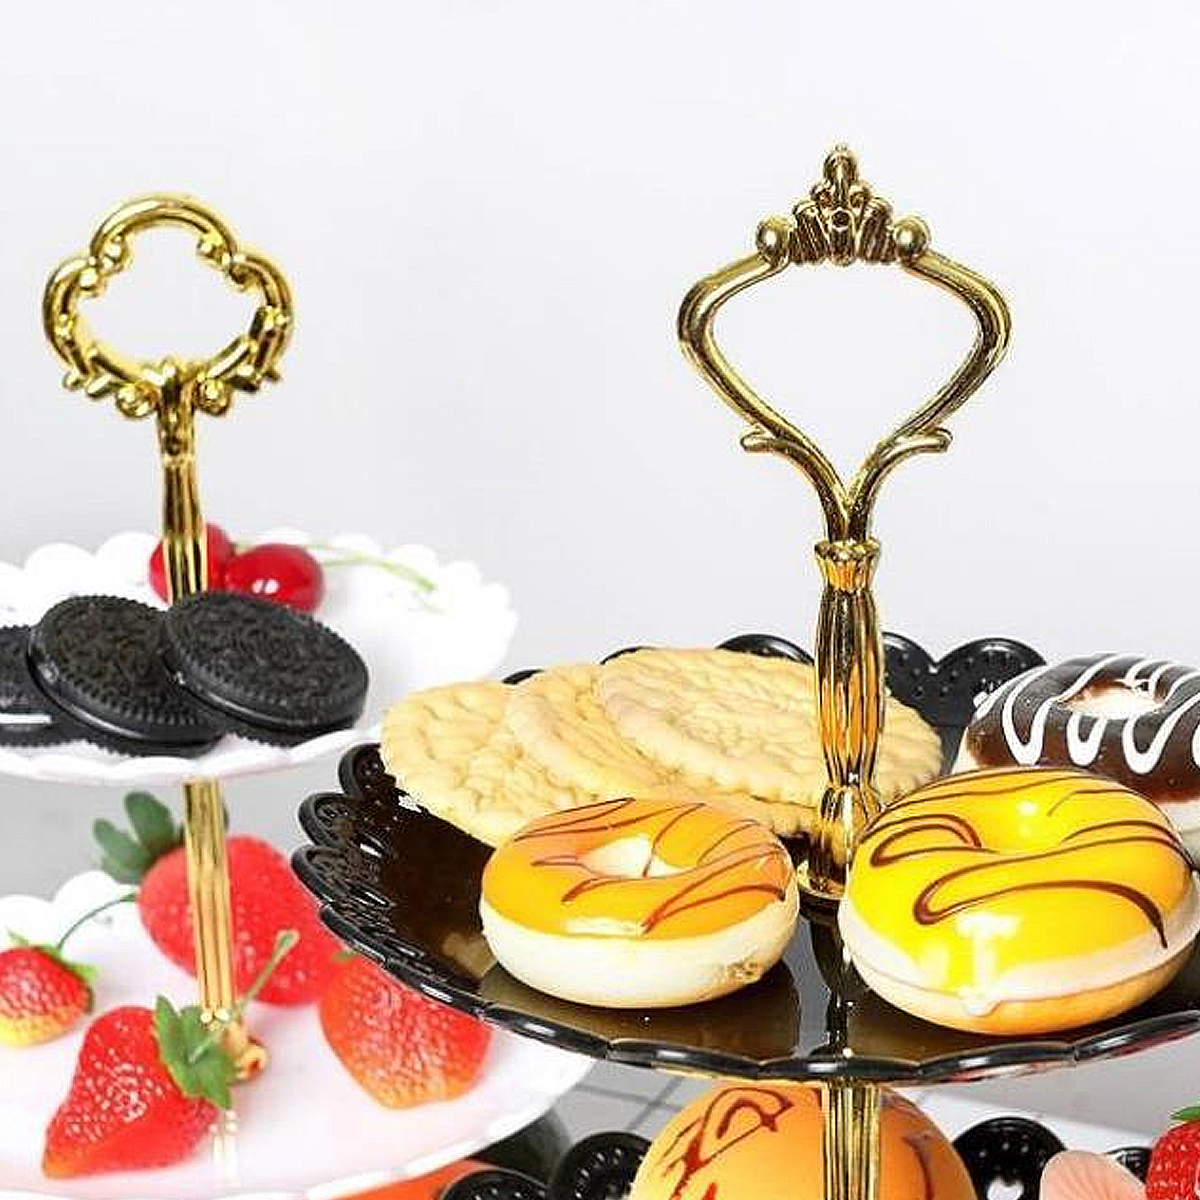 3-Layers-Round-Plate-Cake-Dessert-Cookies-Tray-Wedding-Birthday-Party-Decor-Stand-Candy-Shelf-S-Size-1702138-7